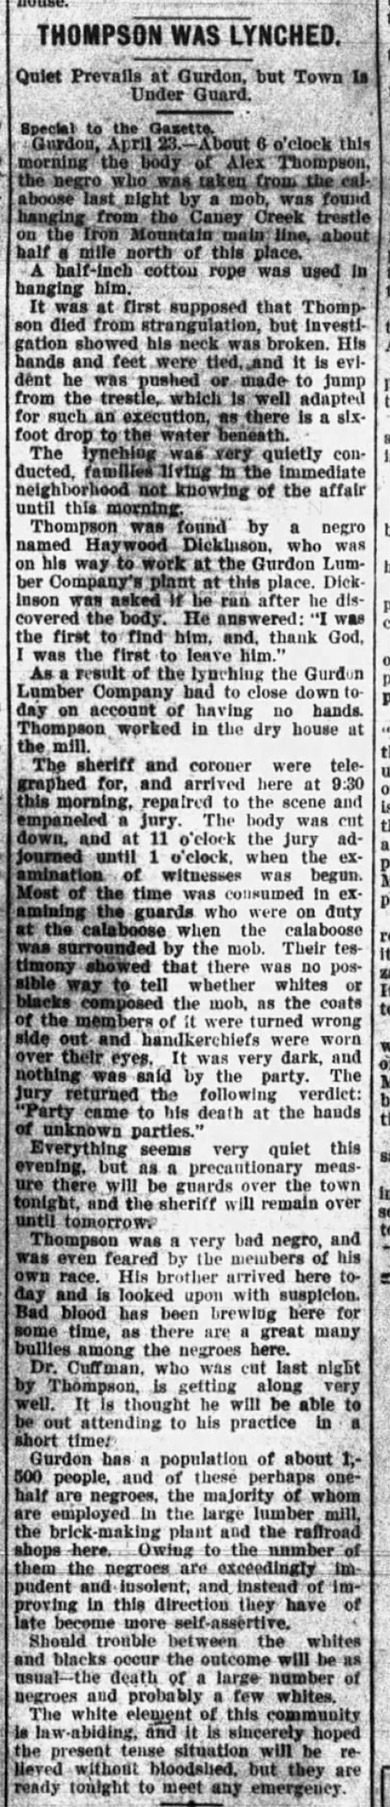 "Thompson was Lynched" newspaper clipping